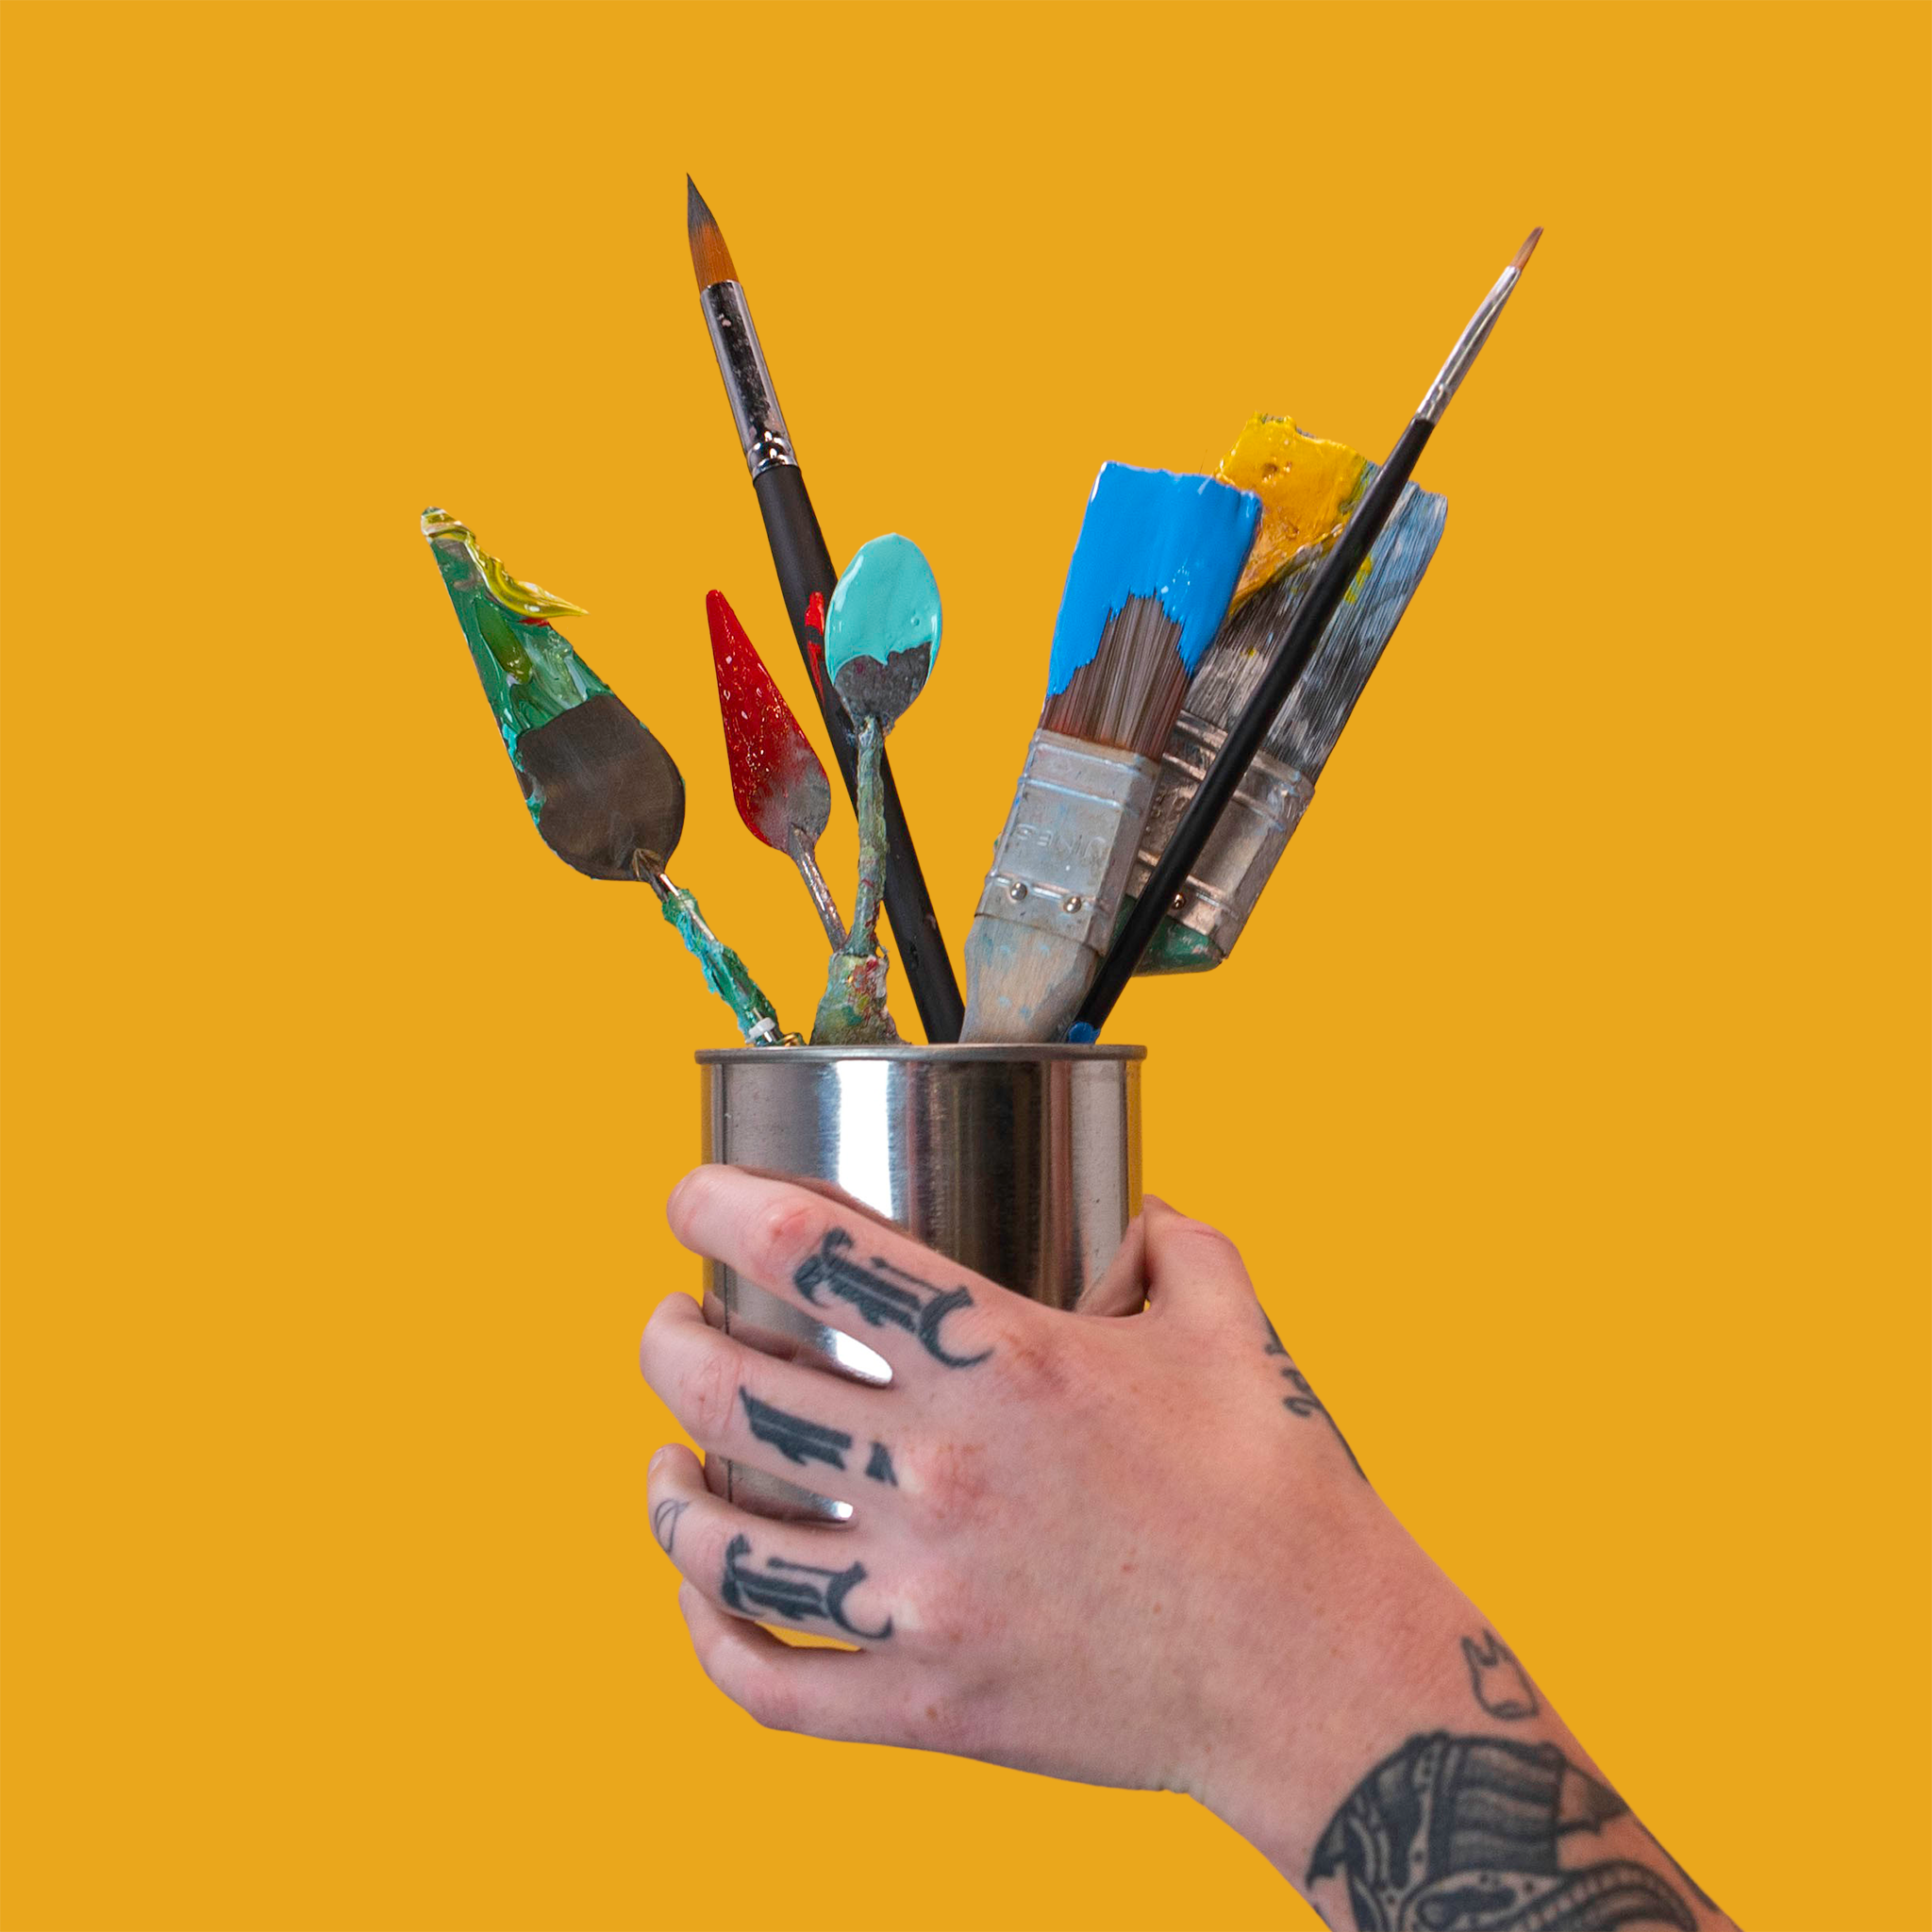 A tattooed artist's hand holds a stainless steel cup filled with various paint-covered tools including brushes and palette knives.